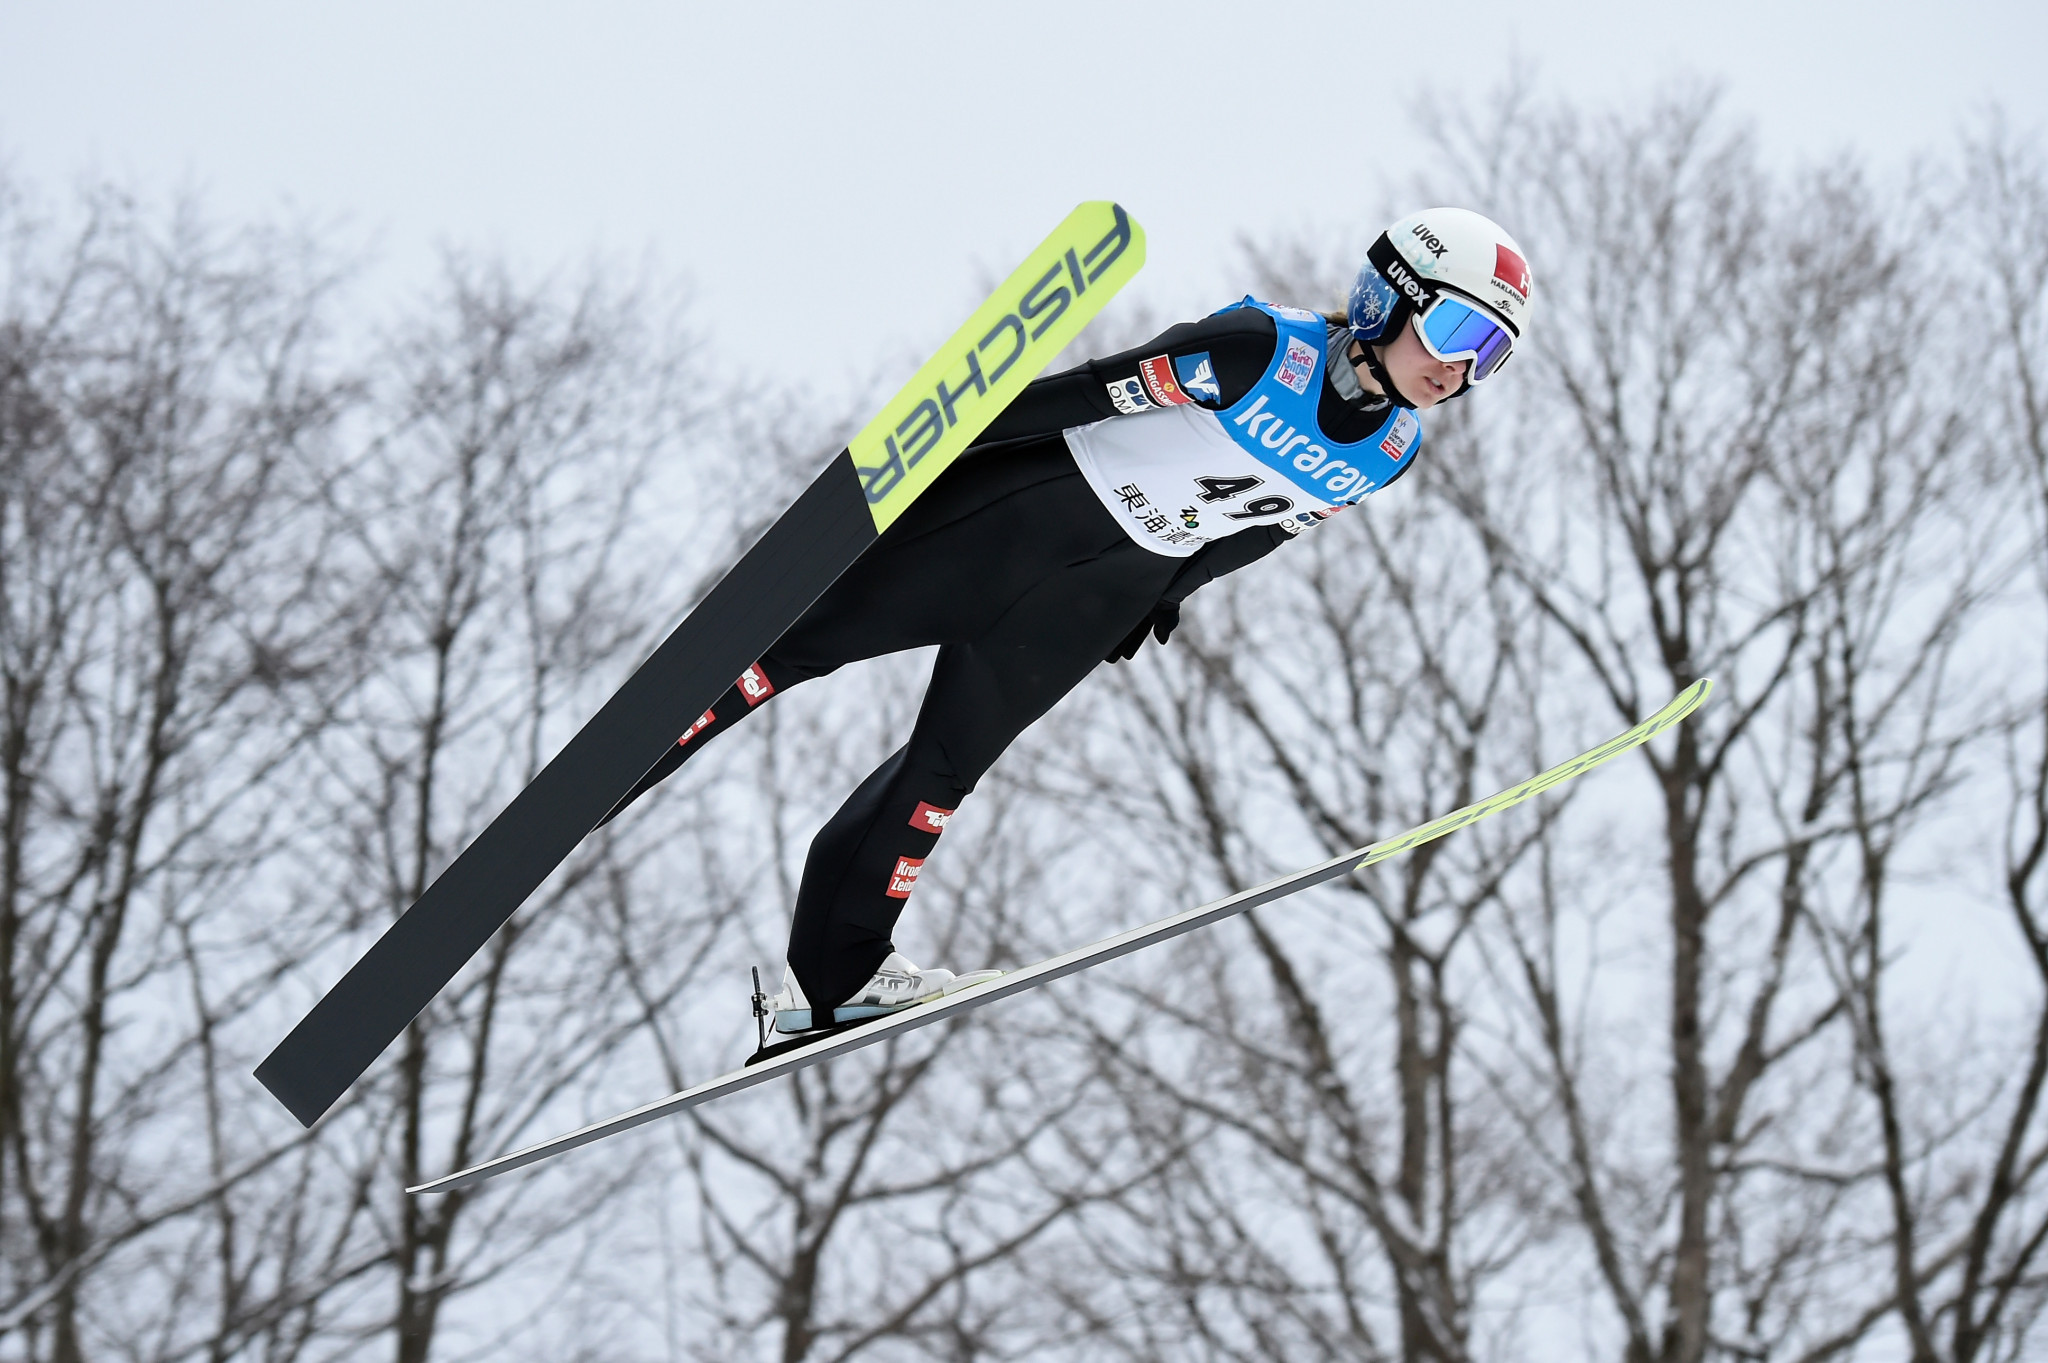 Chiara Hoelzl of Austria took the lead in the FIS Ski Jumping World Cup in Rasnov ©Getty Images